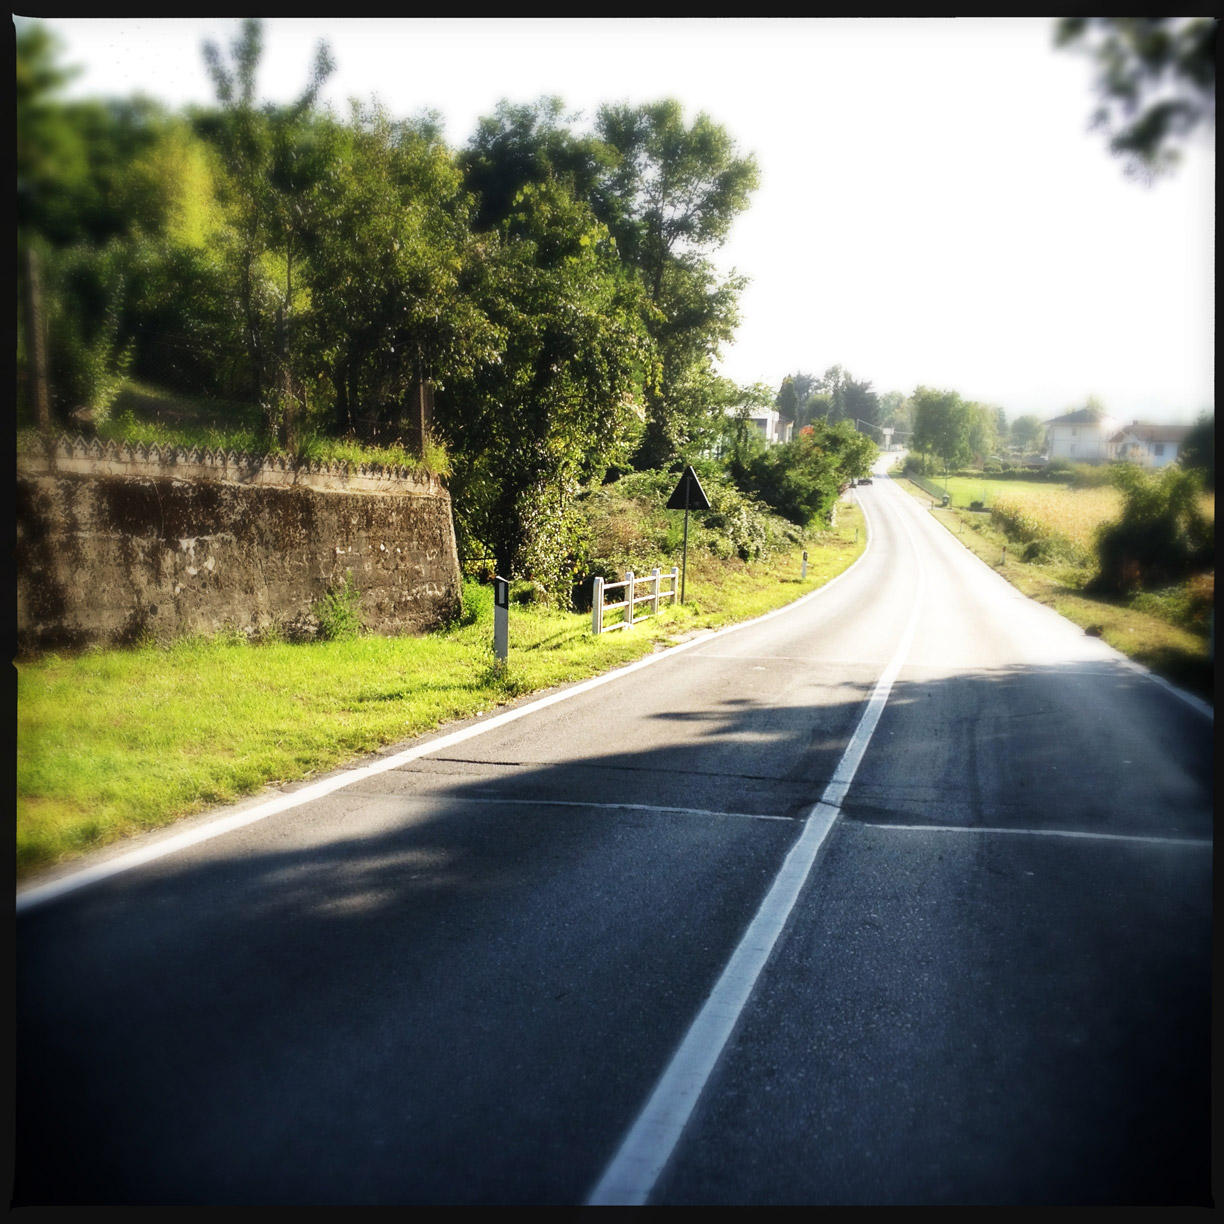 On the road # 2...